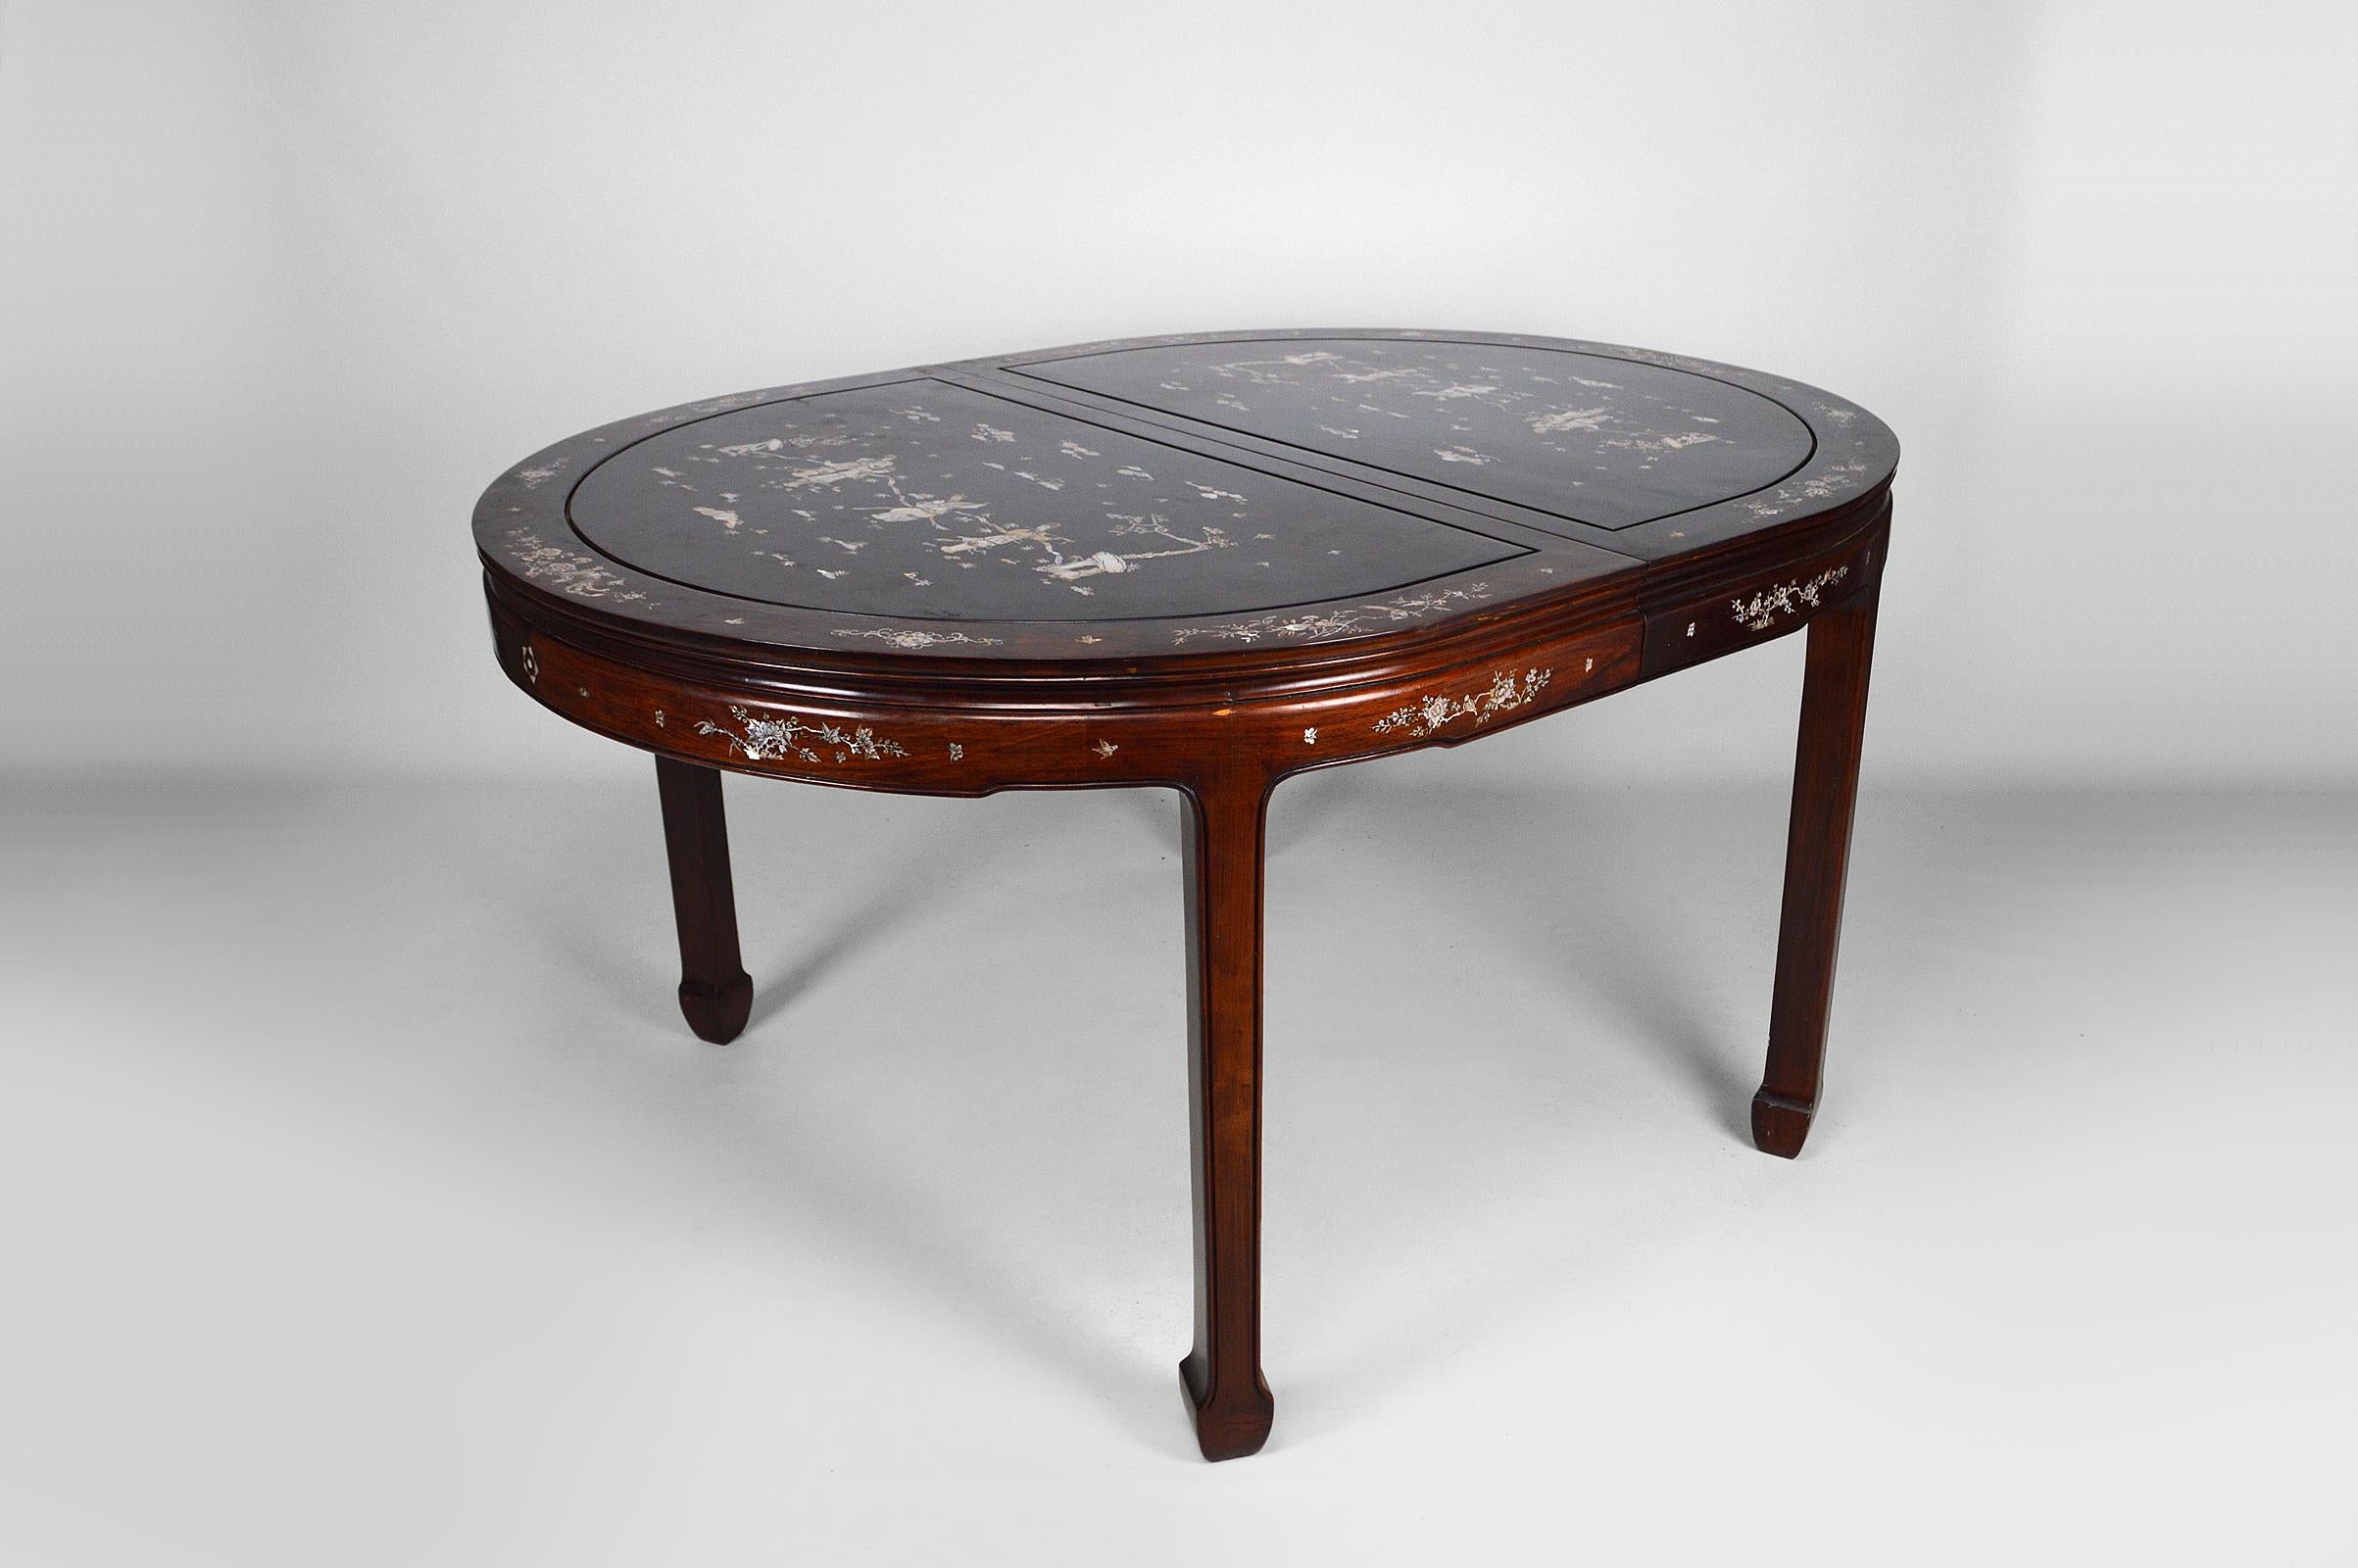 Important Asian dining table with marquetry.

2 Extensions also inlaid.

Beautiful marquetry representing life scenes with characters (musicians) with floral (flowers) and animal (birds, insects, butterflies, dragonflies) elements.

Very good